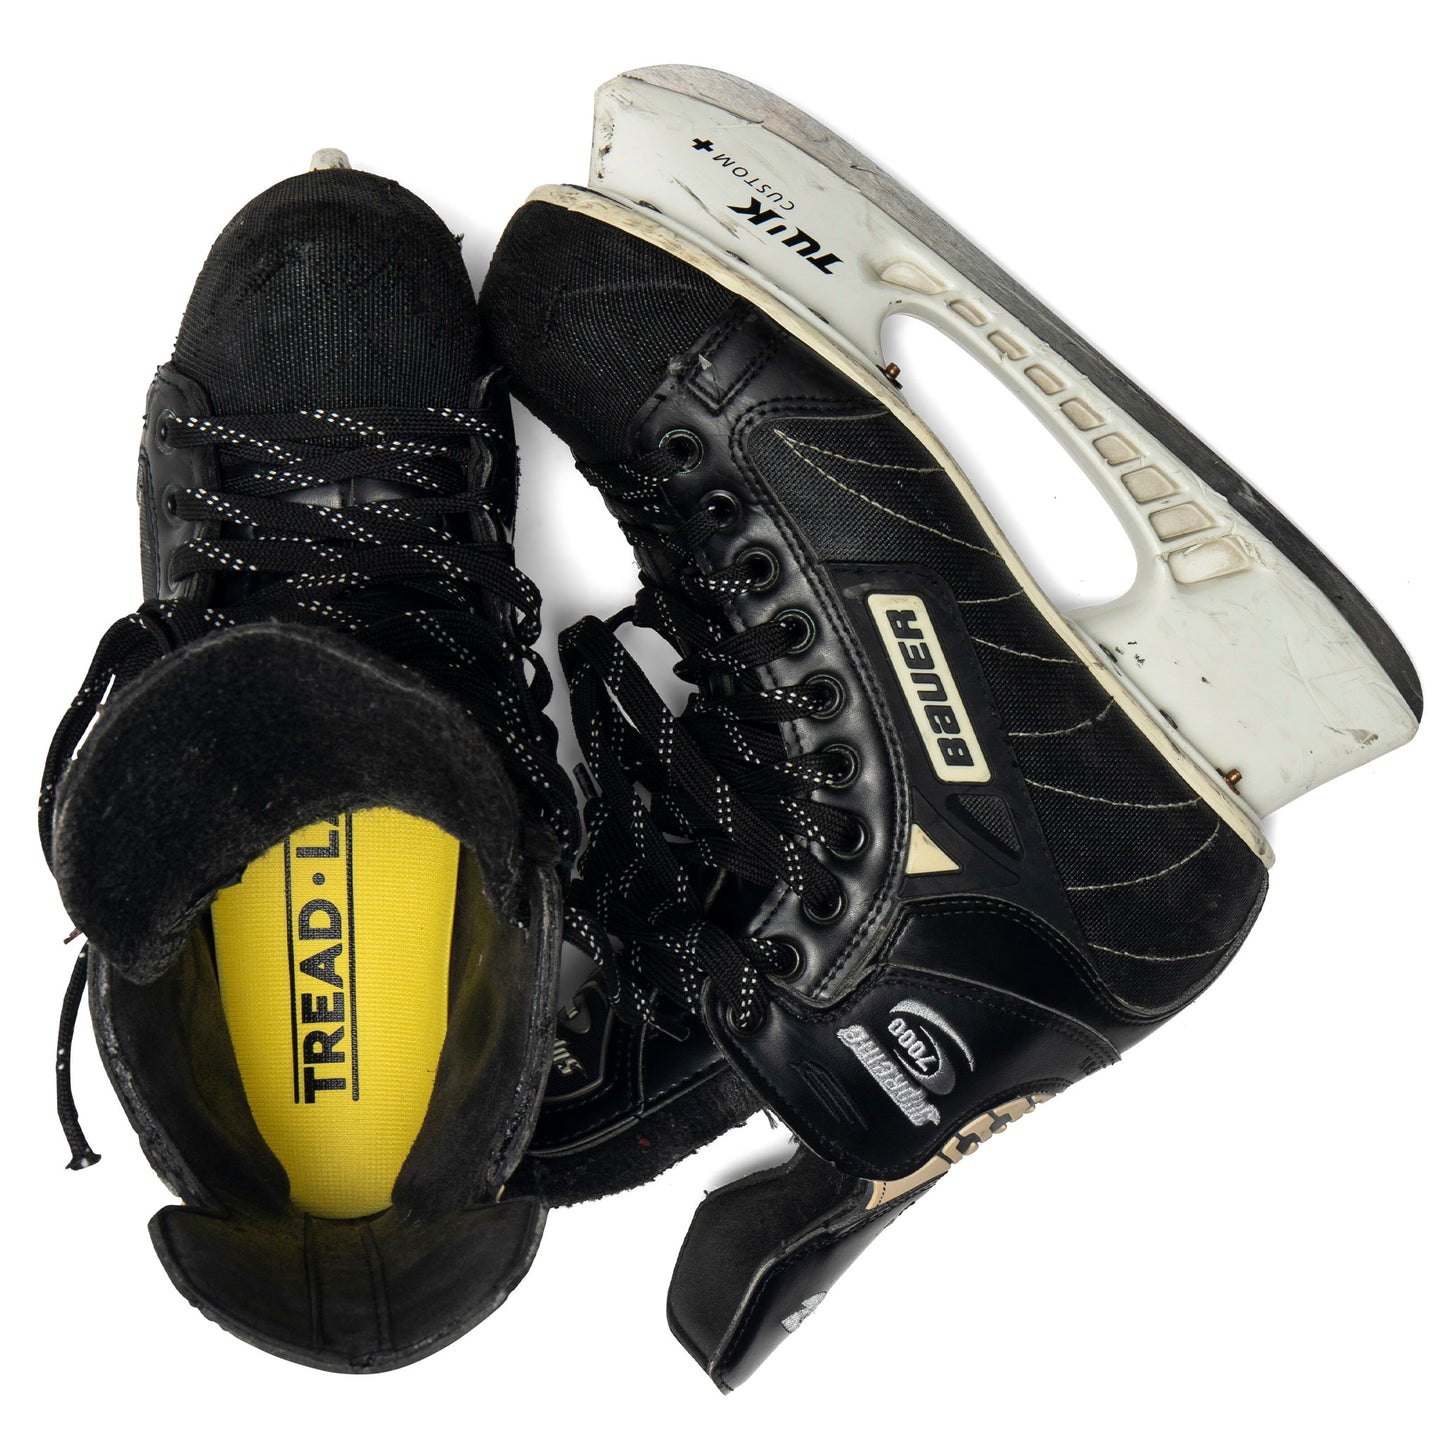 Dash Thin Insole Replacement Top Covers for Hockey Skates